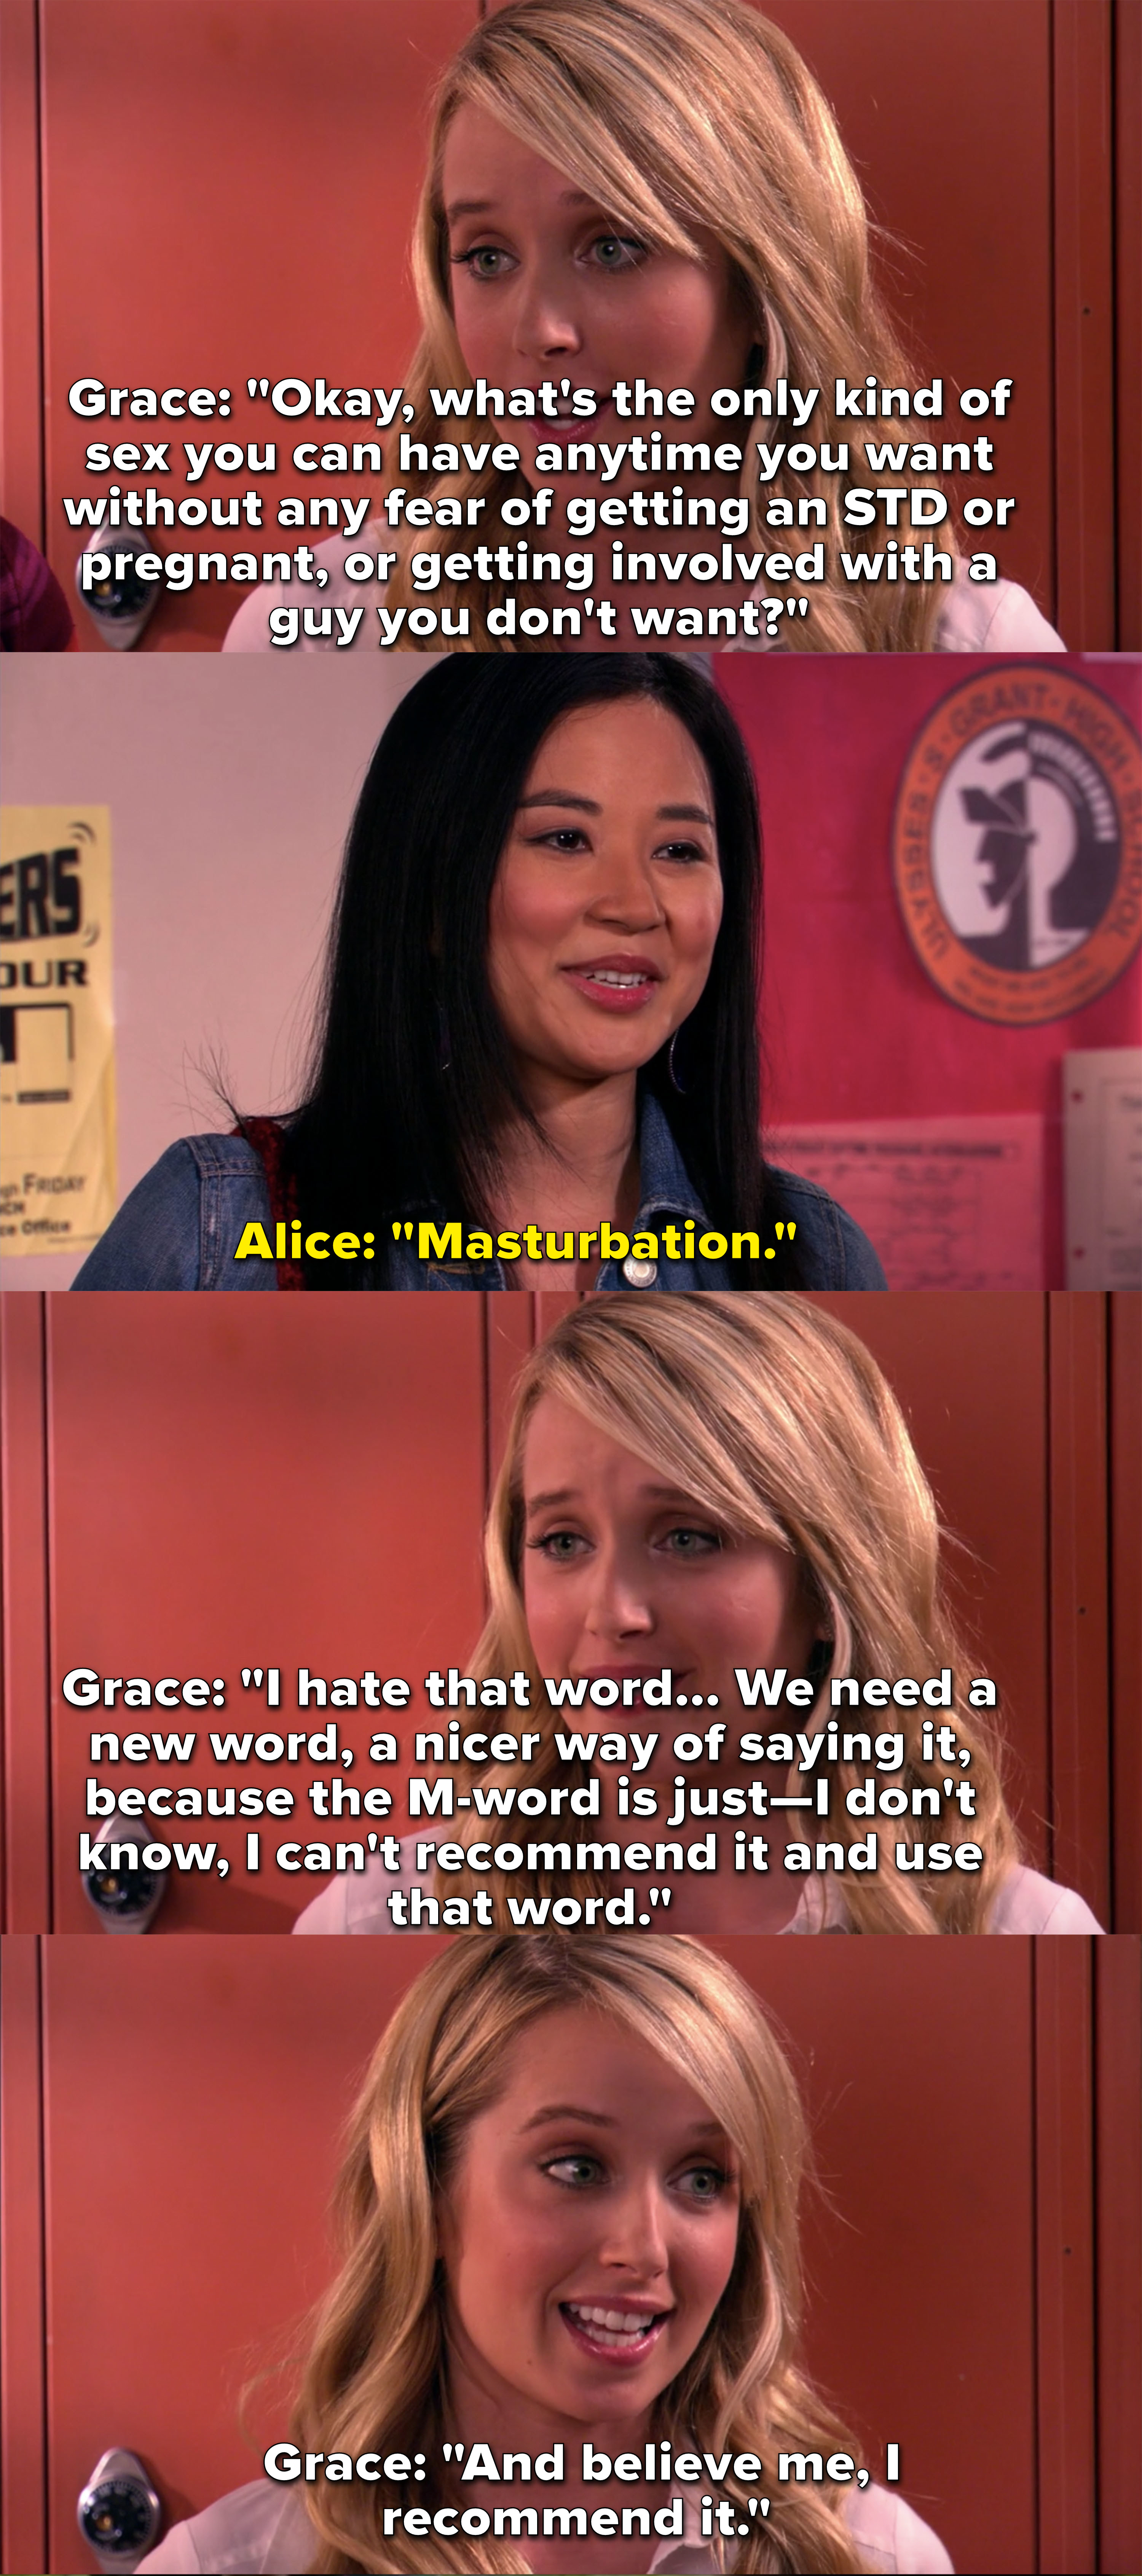 Grace says she recommends masturbation but wants to call it something else because it sounds too icky